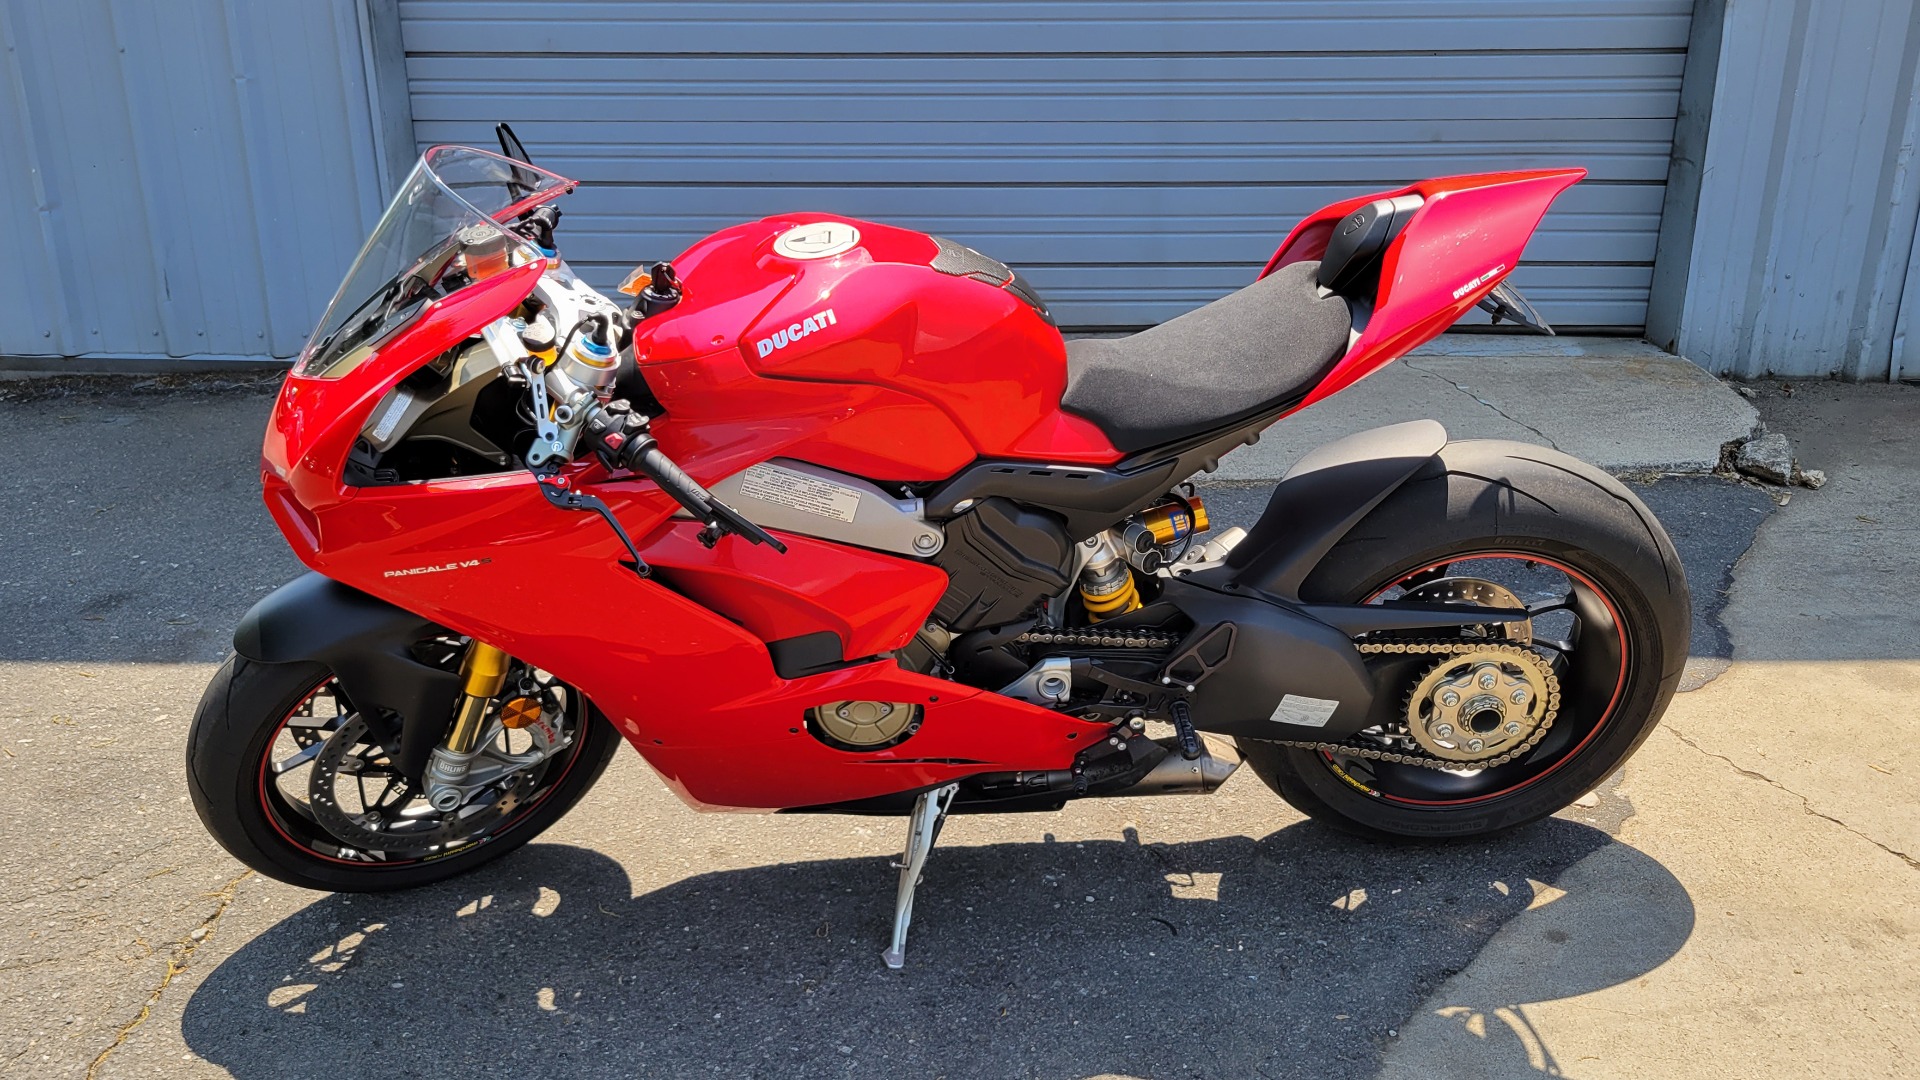 Used 2018 Ducati PANIGALE V4S / 1103CC 214HP / FUEL INJECTED / LOW MILES for sale $24,500 at Formula Imports in Charlotte NC 28227 2